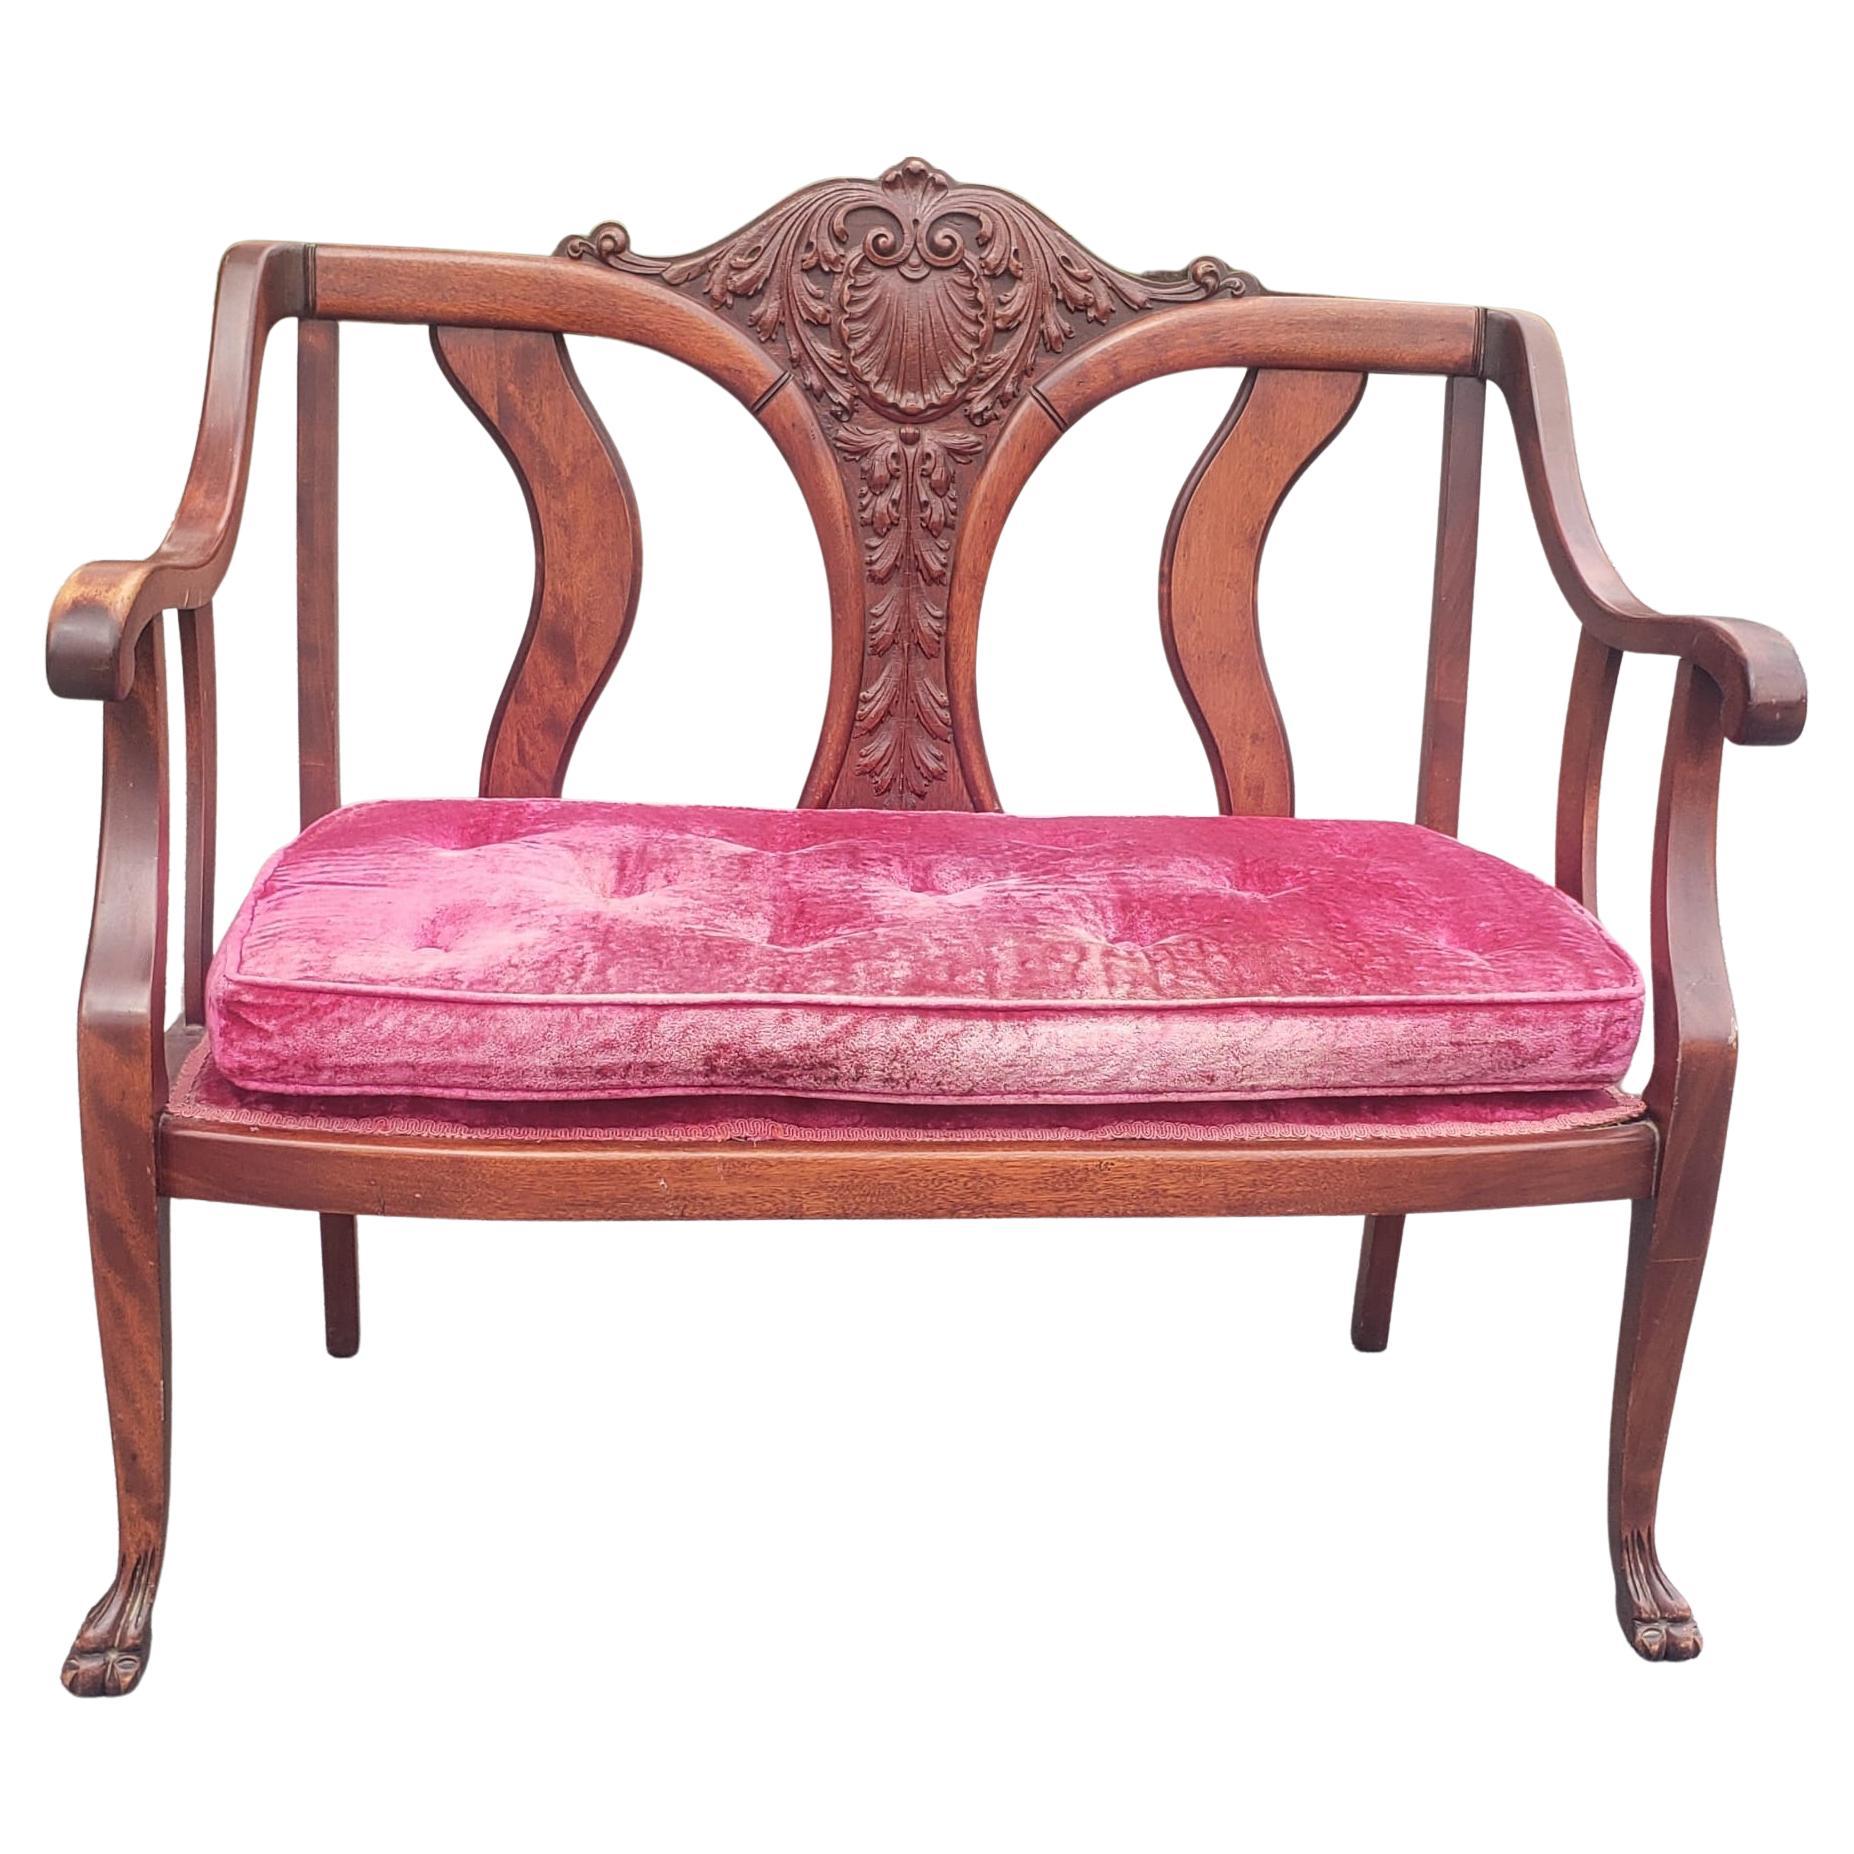 Early 20th Century Victorian Style Carved Mahogany and Upholstered Settee